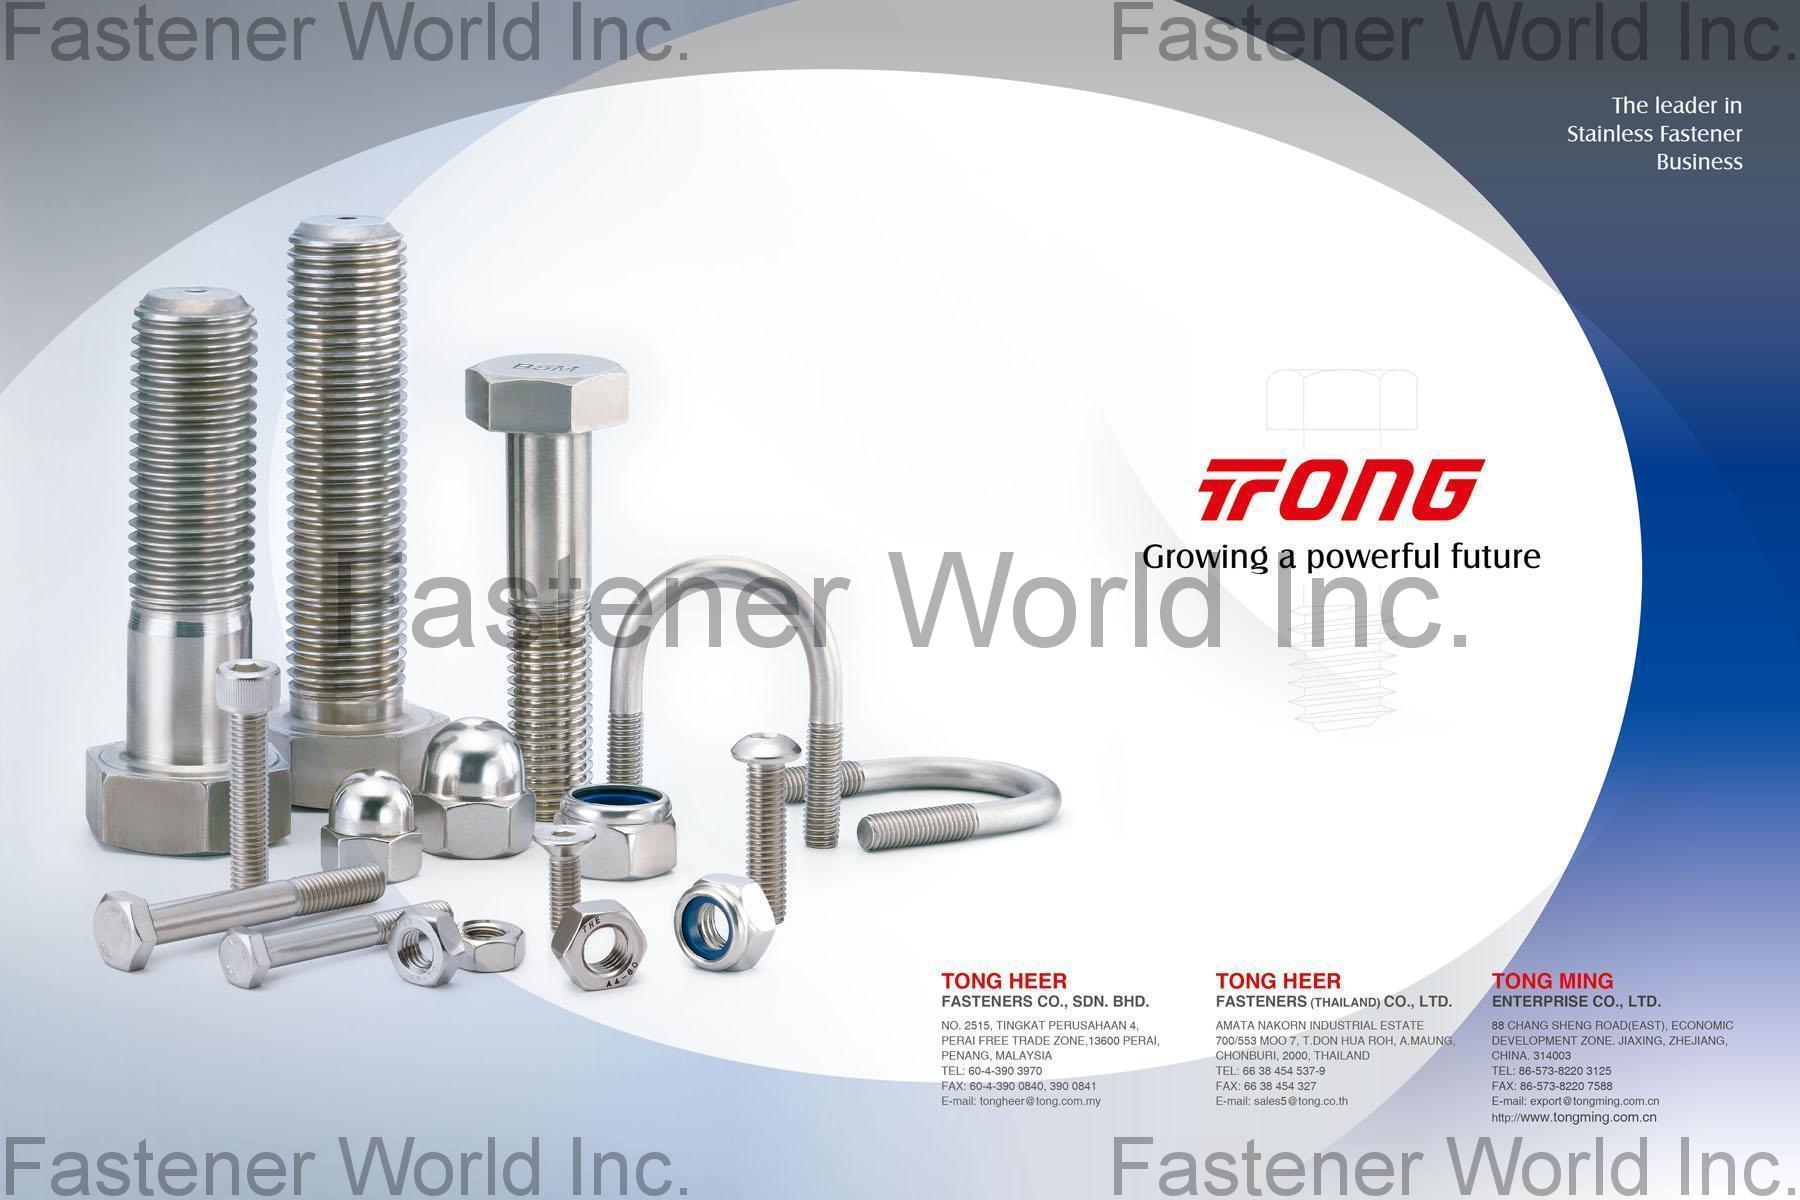 TONG HEER FASTENERS CO., SDN. BHD  , Stainless Steel Fasteners, Hex Head Cap Screws, Socket Head Cap Screws, Sems Bolts, Carriage Bolts, Washers, Threaded Rods & Studs, Screw Cold Wire , Stainless Steel Screws